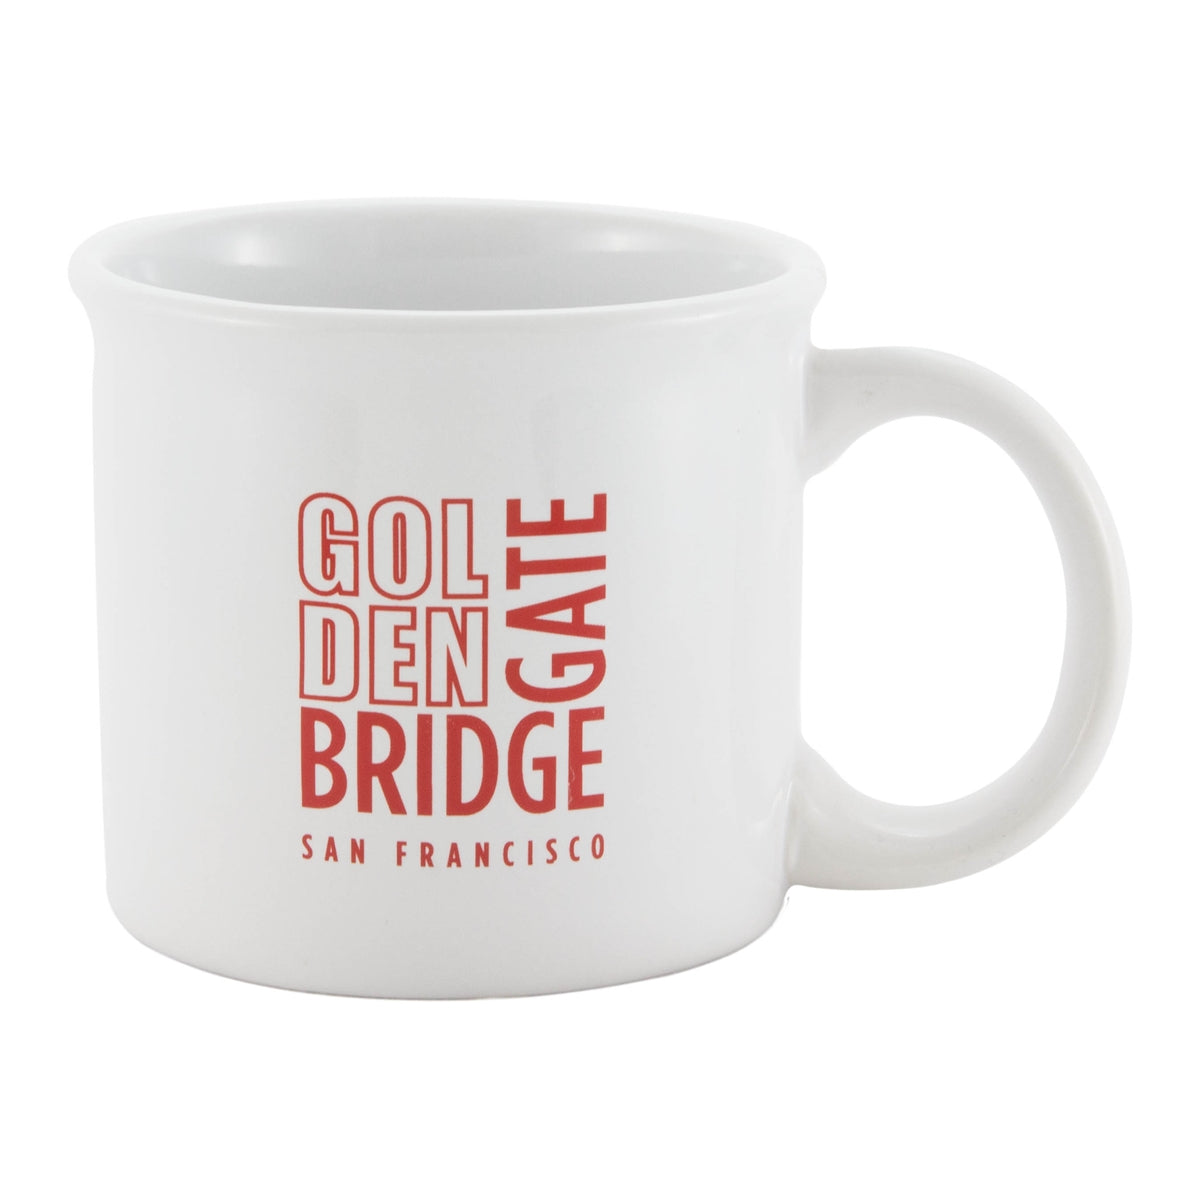 14 oz. white mug with red design featuring the Golden Gate Bridge's Art Deco tower and "Dream Big" slogan.